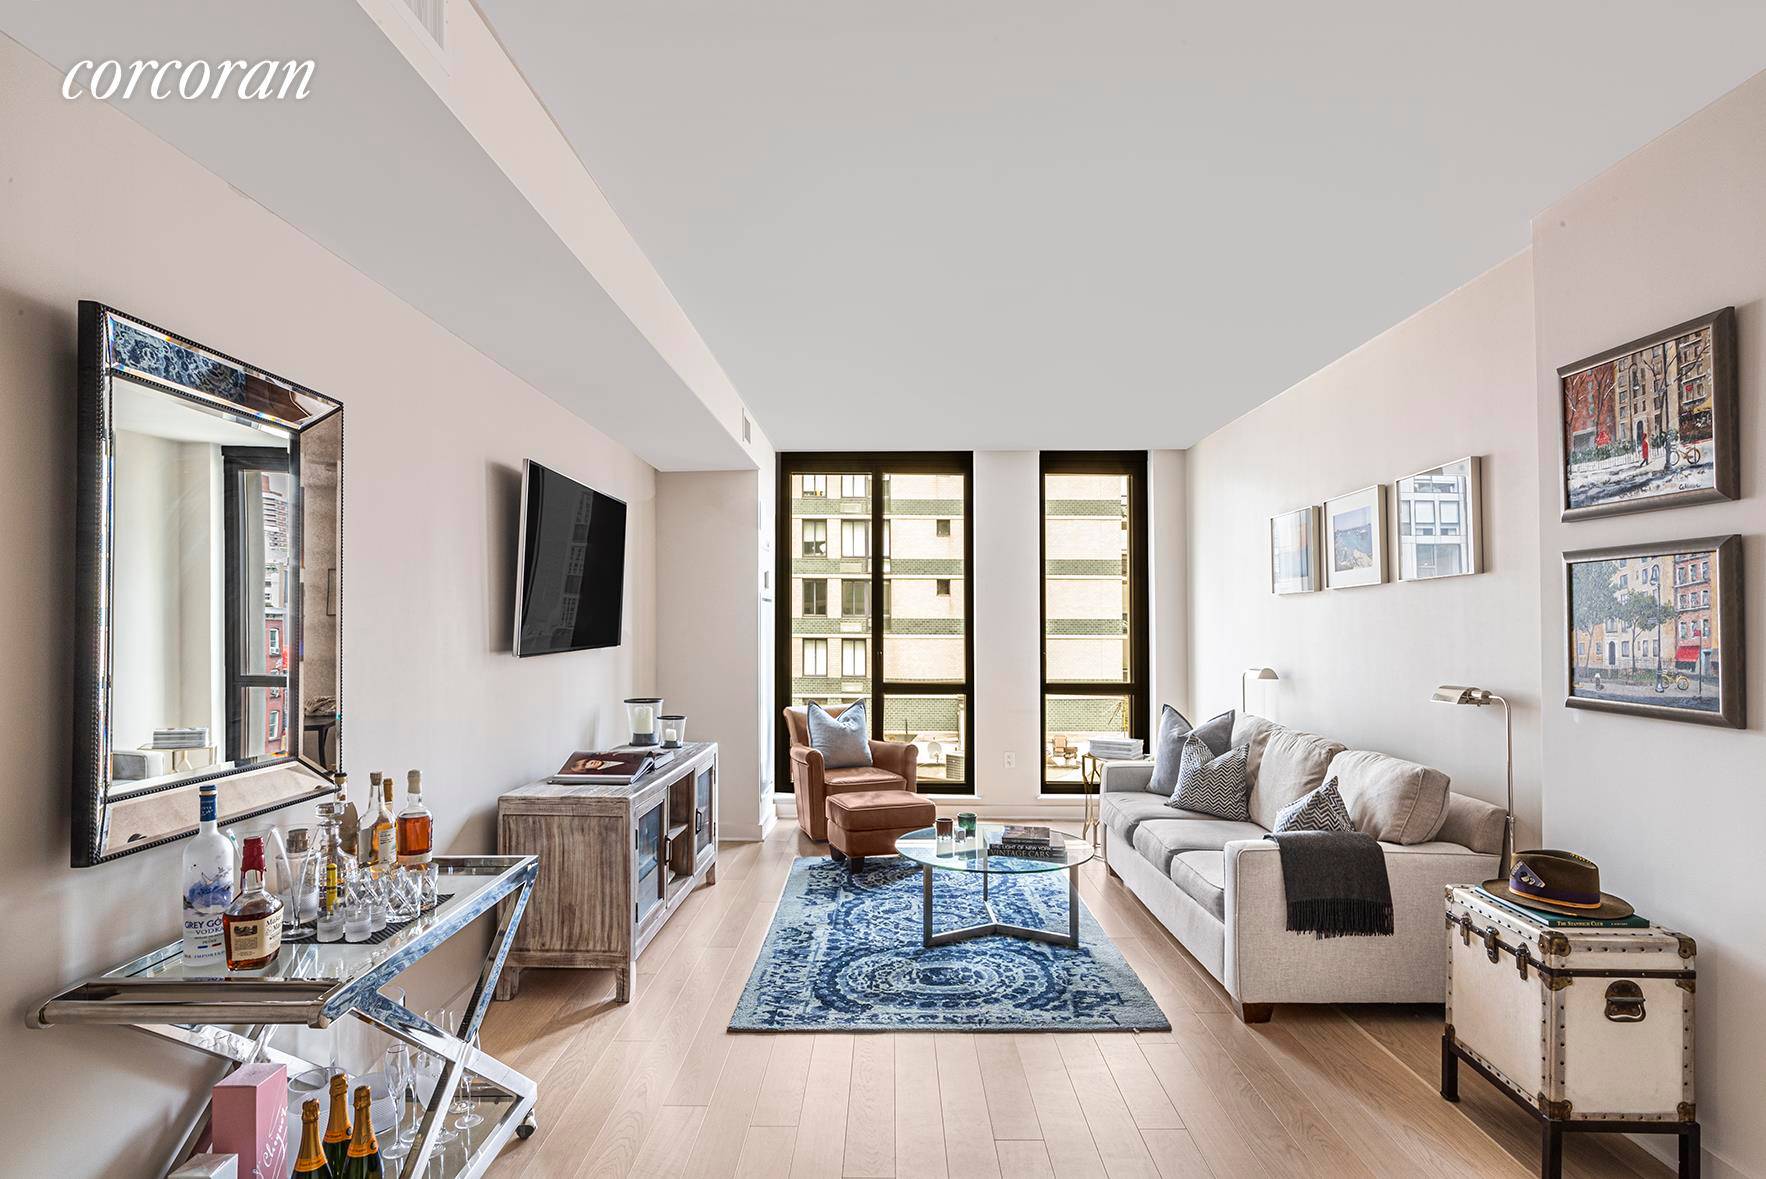 Located approximately 450 feet away from New York CityA s most exclusive park, this mint one bedroom in prime Gramercy is boutique condo living at its finest.